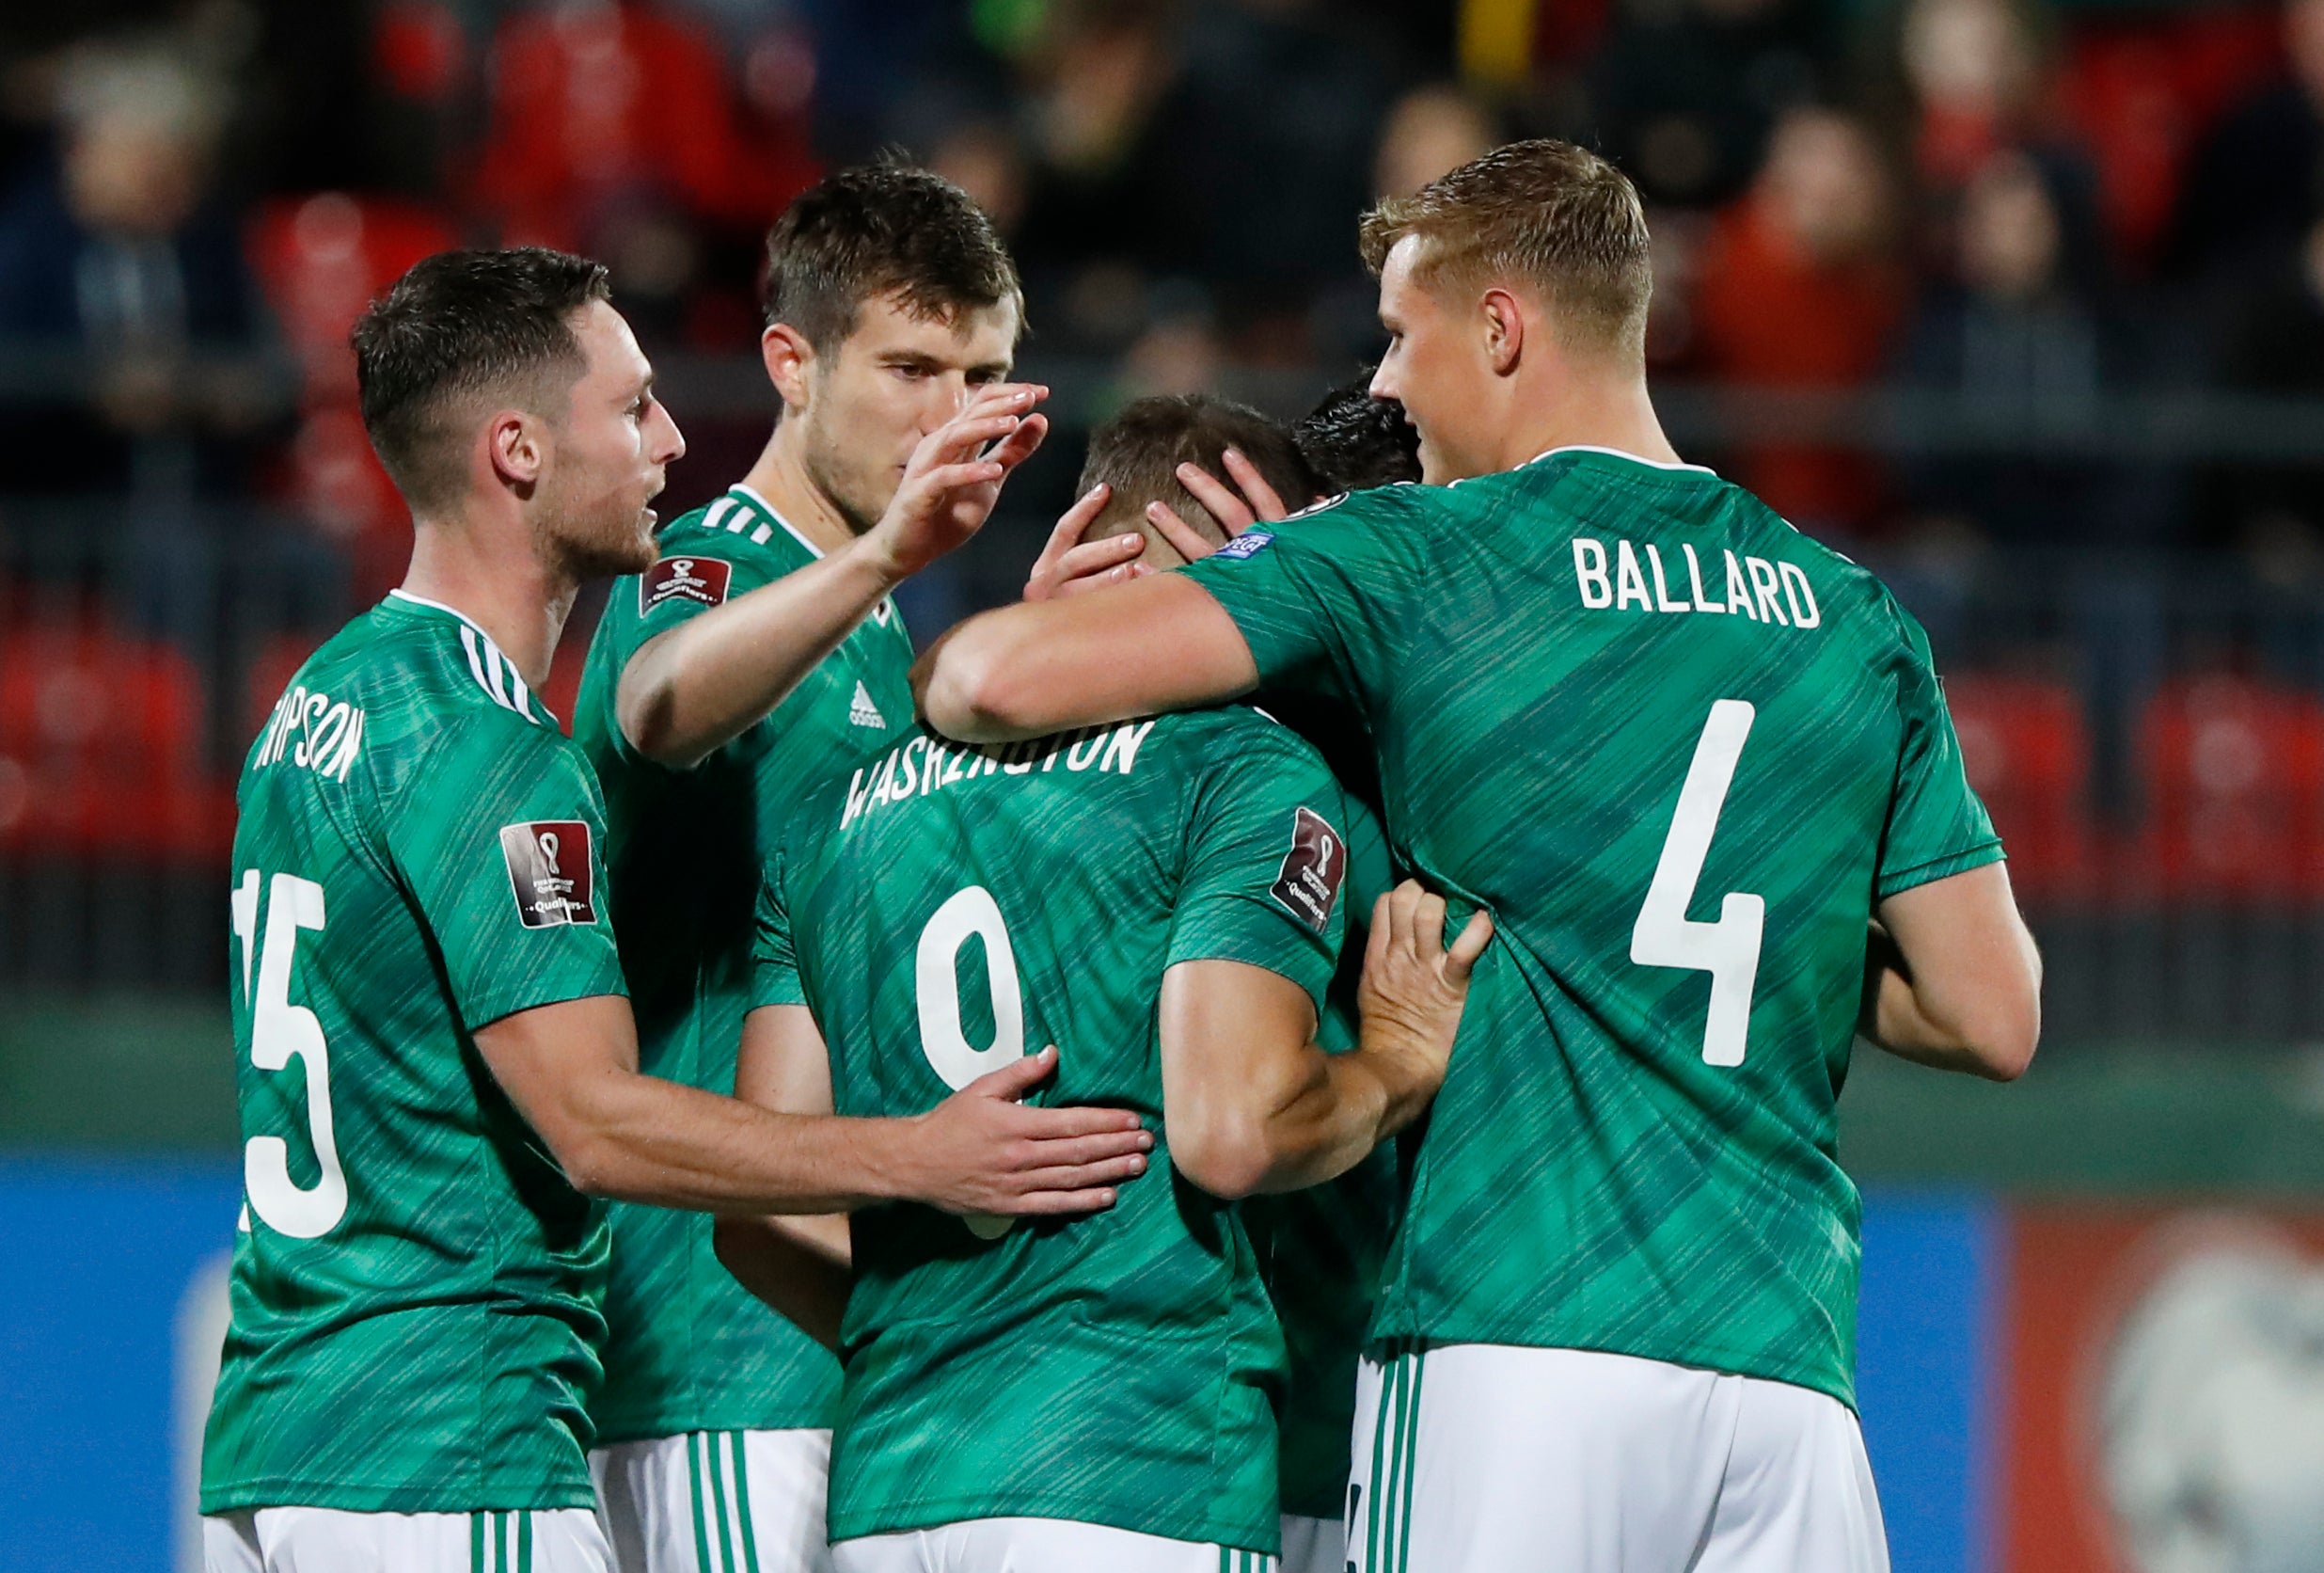 Northern Ireland celebrate their 4-1 win over Lithuania